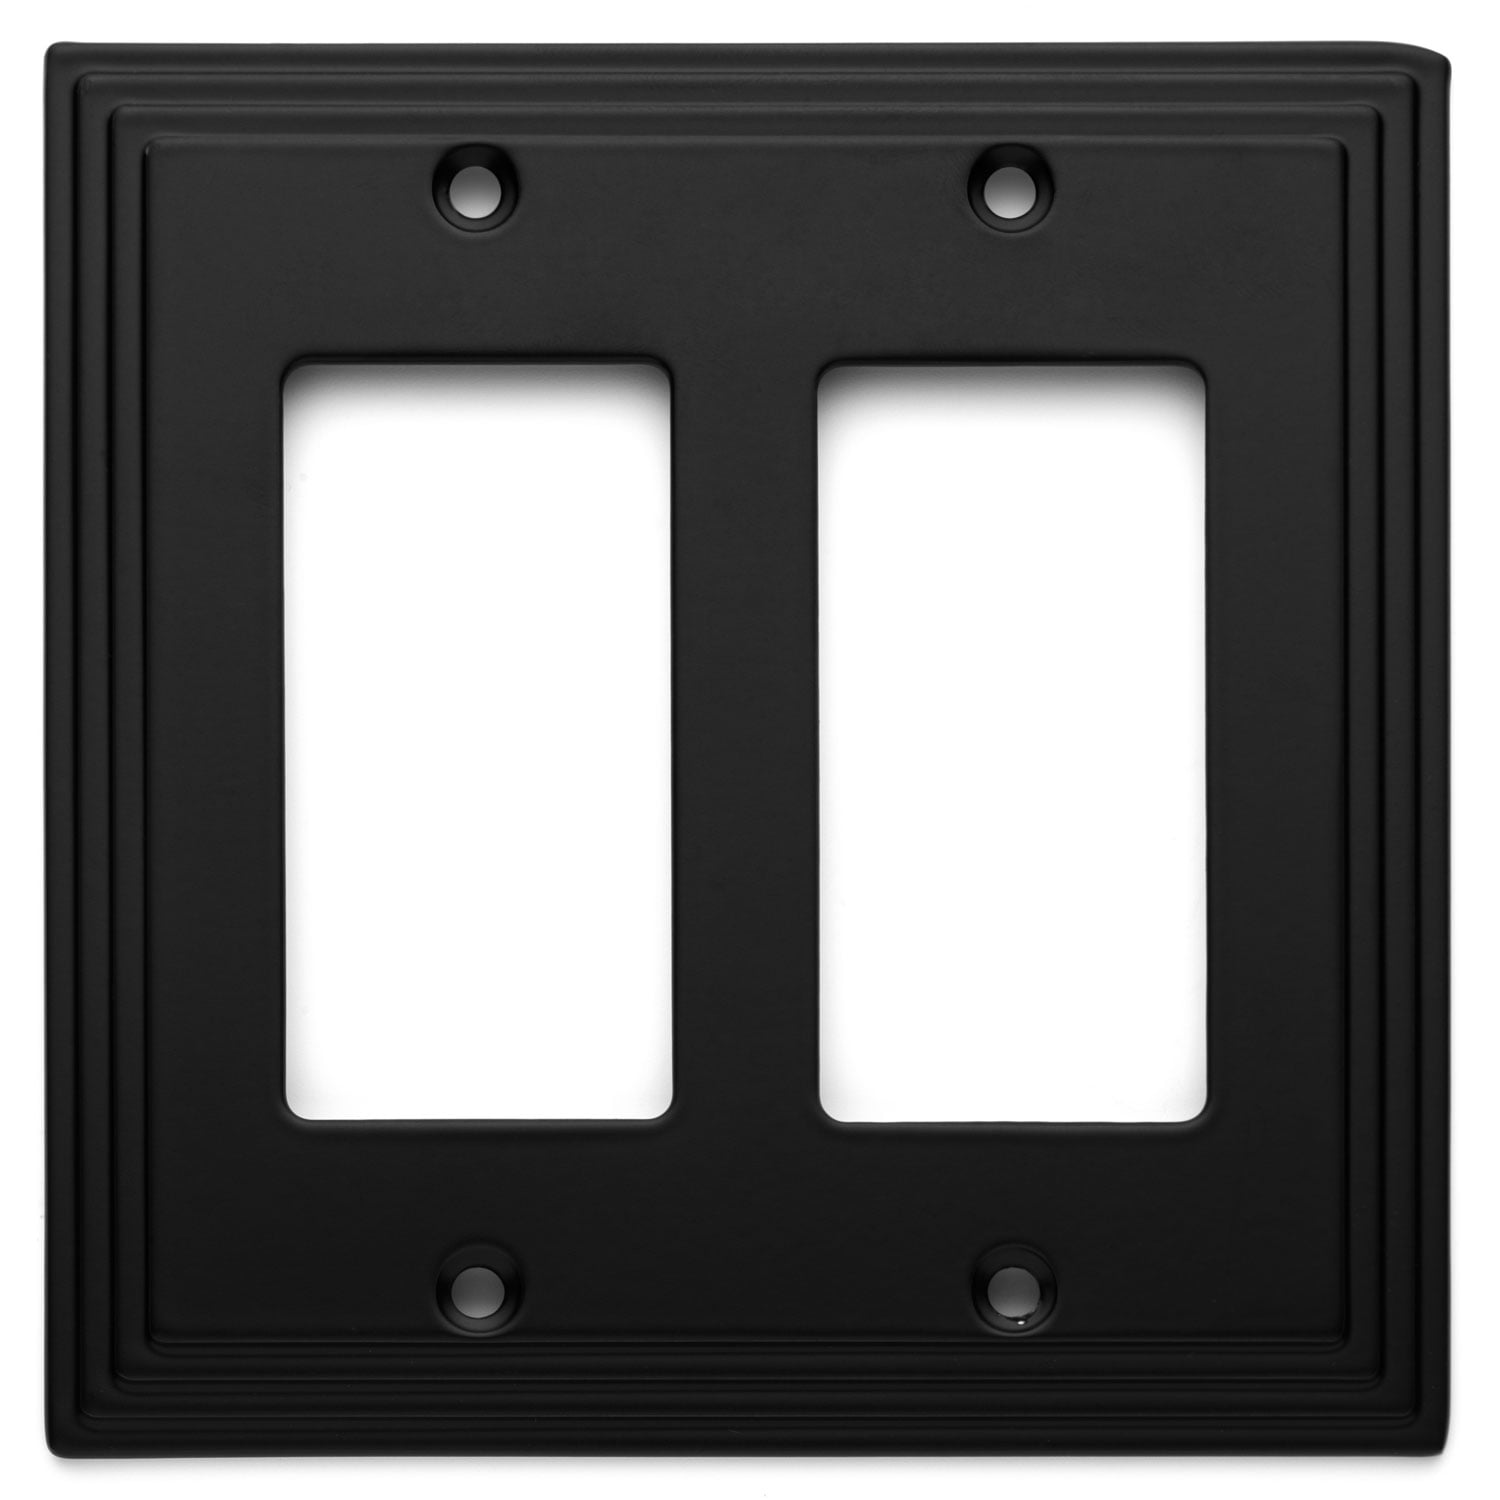 Cosmas 44000-ORB Oil Rubbed Bronze Single GFI Decora Rocker Wall Switch Plate Switchplate Cover 